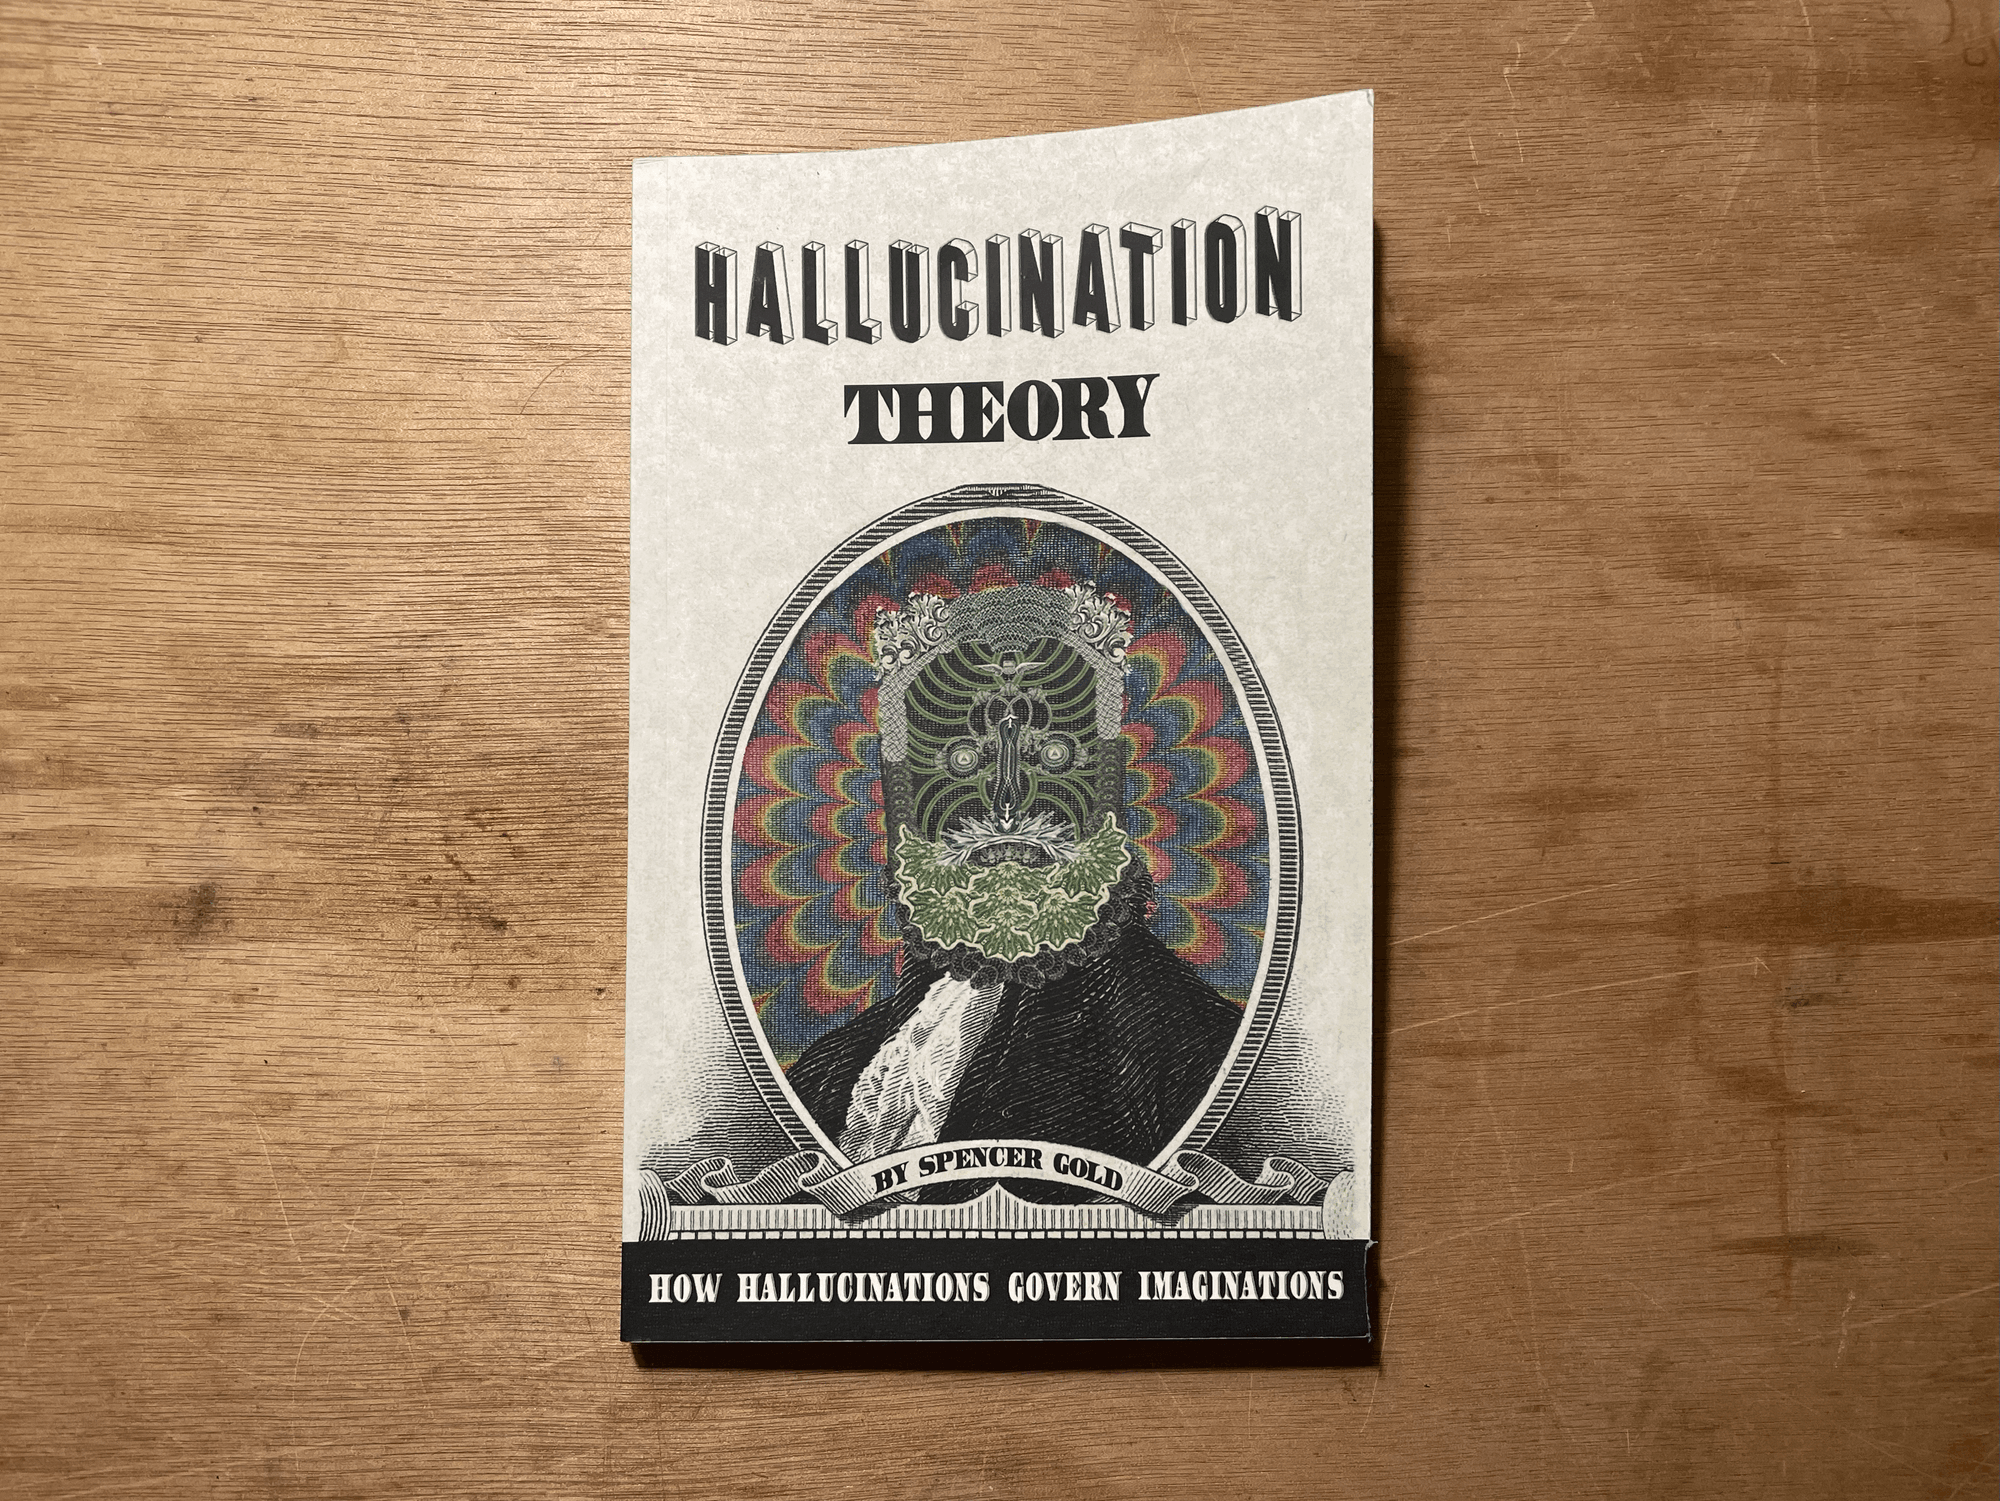 How hallucinations govern imaginations